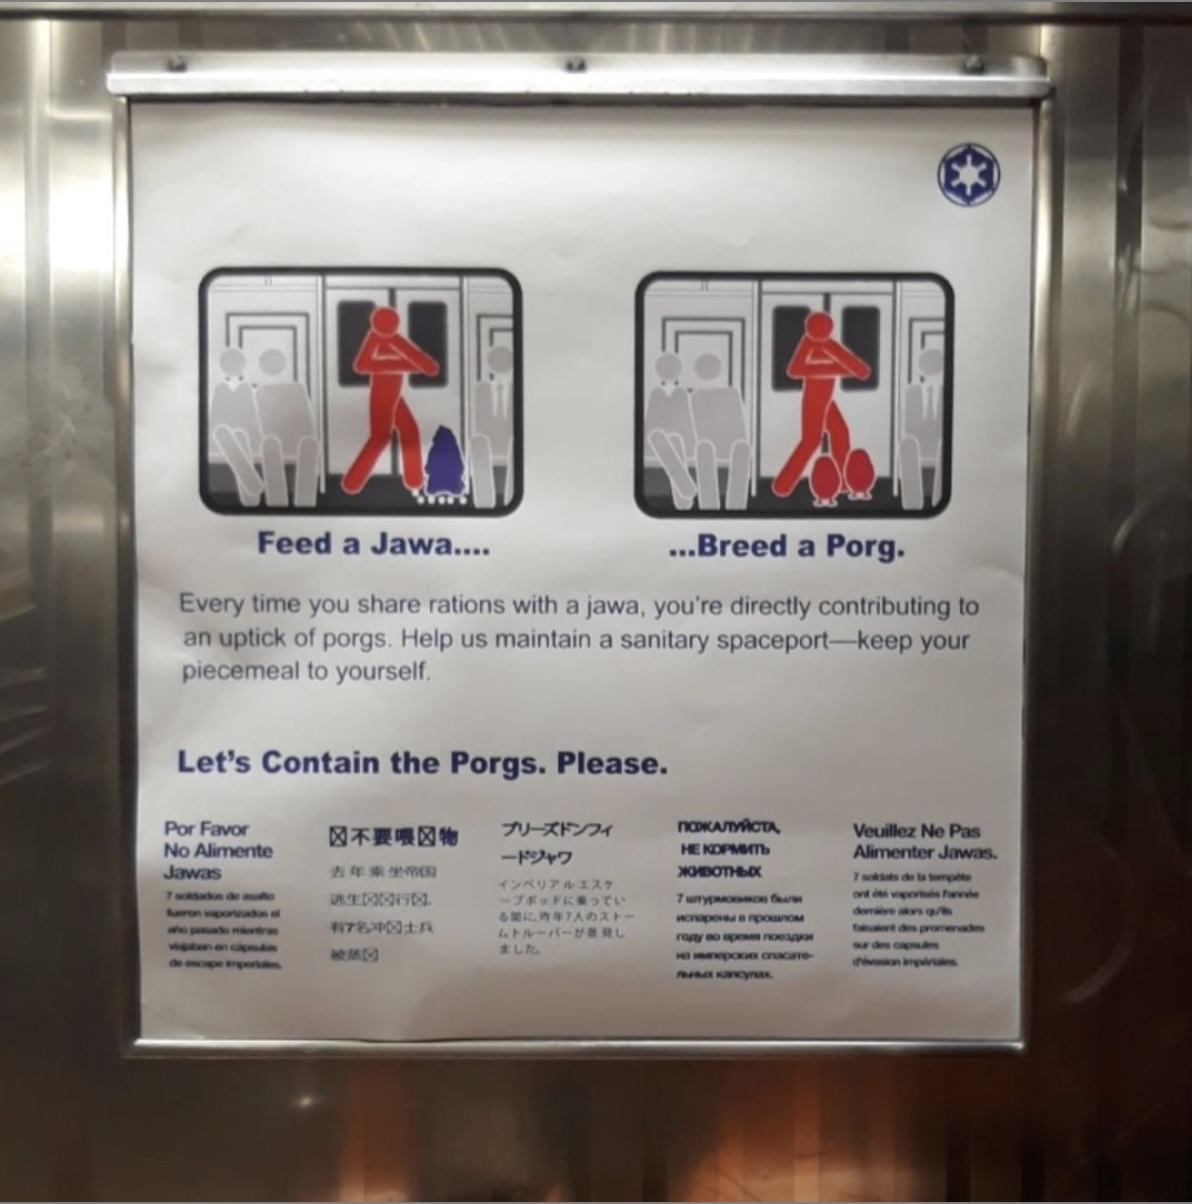 poster inside of an MTA subway cart cautioning riders by using themes from Star Wars films